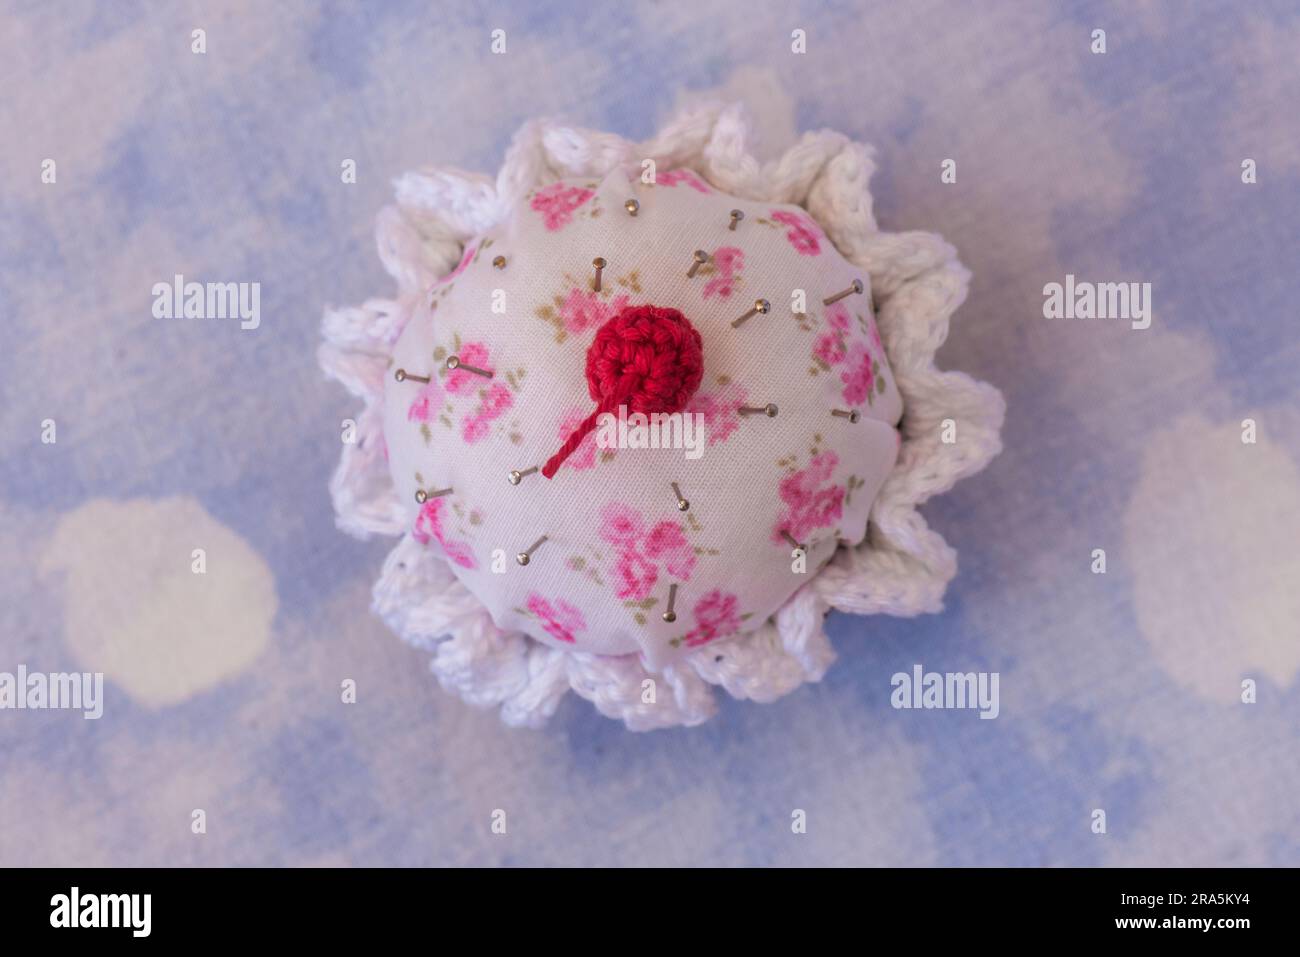 details of a cupcake-shaped pincushion, on a texturede background Stock Photo